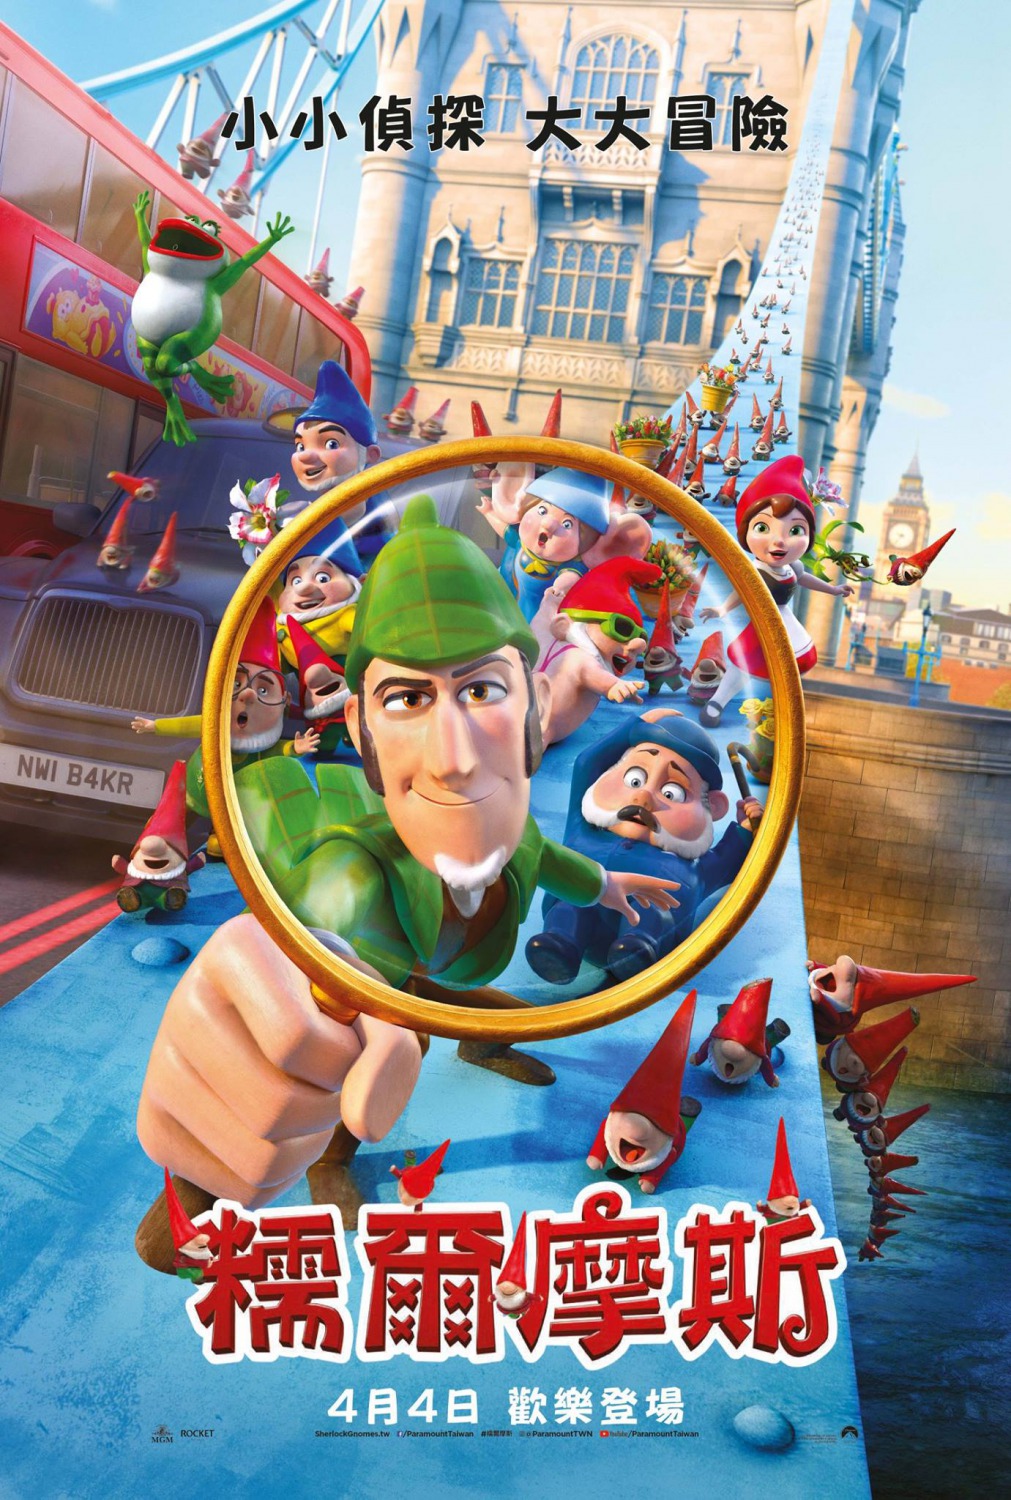 Extra Large Movie Poster Image for Gnomeo & Juliet: Sherlock Gnomes (#25 of 41)